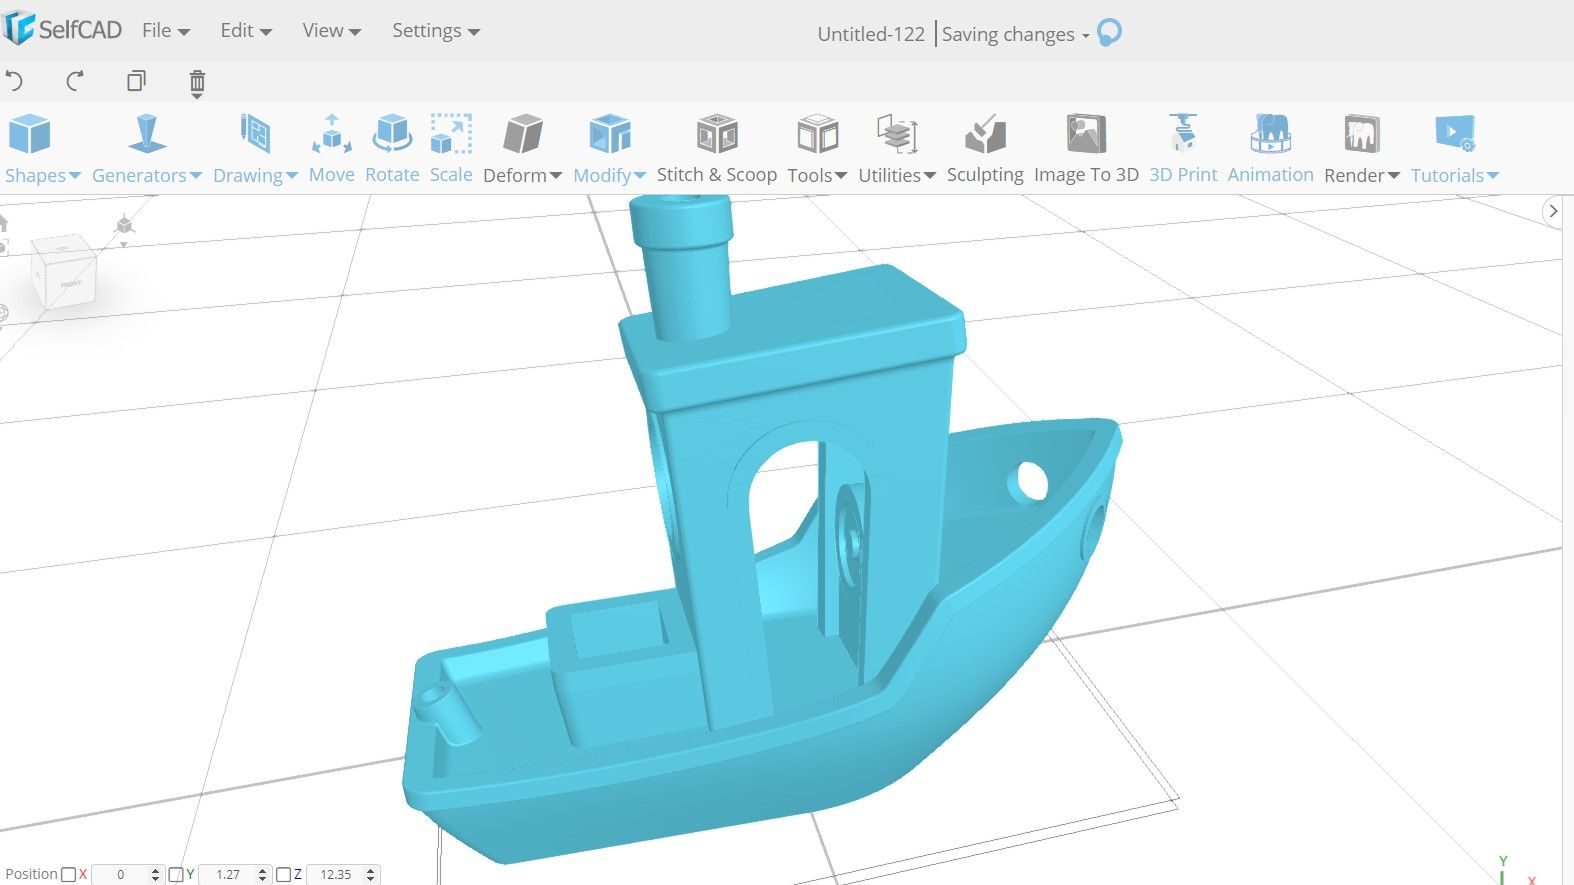 A 3DBenchy used as a test model being opened in a 3D modeling software